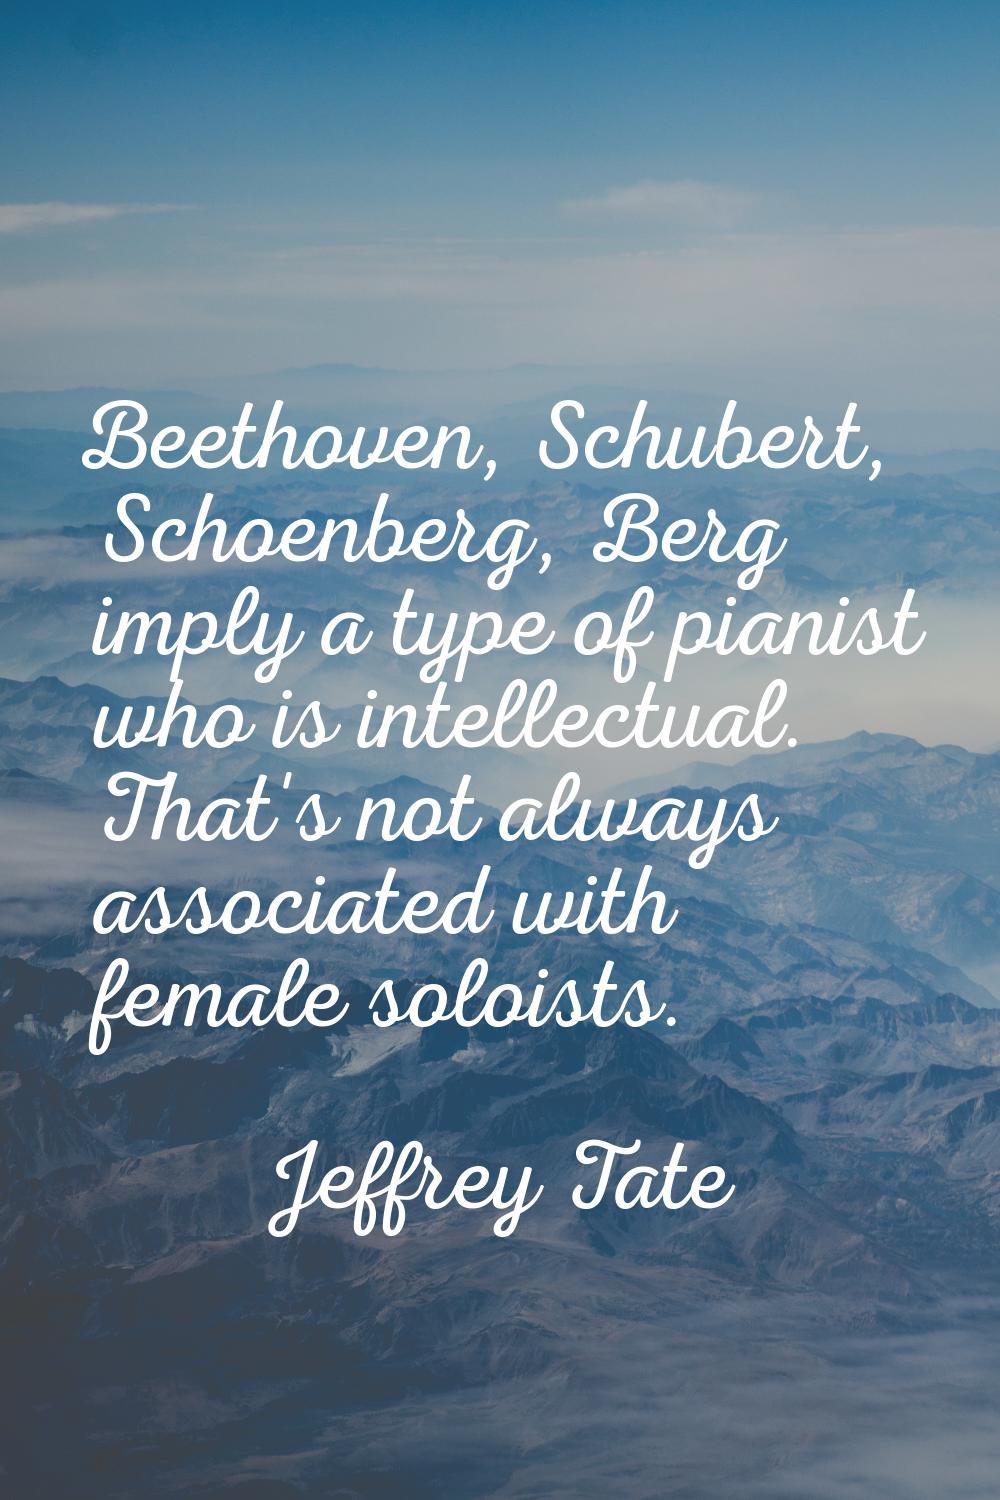 Beethoven, Schubert, Schoenberg, Berg imply a type of pianist who is intellectual. That's not alway